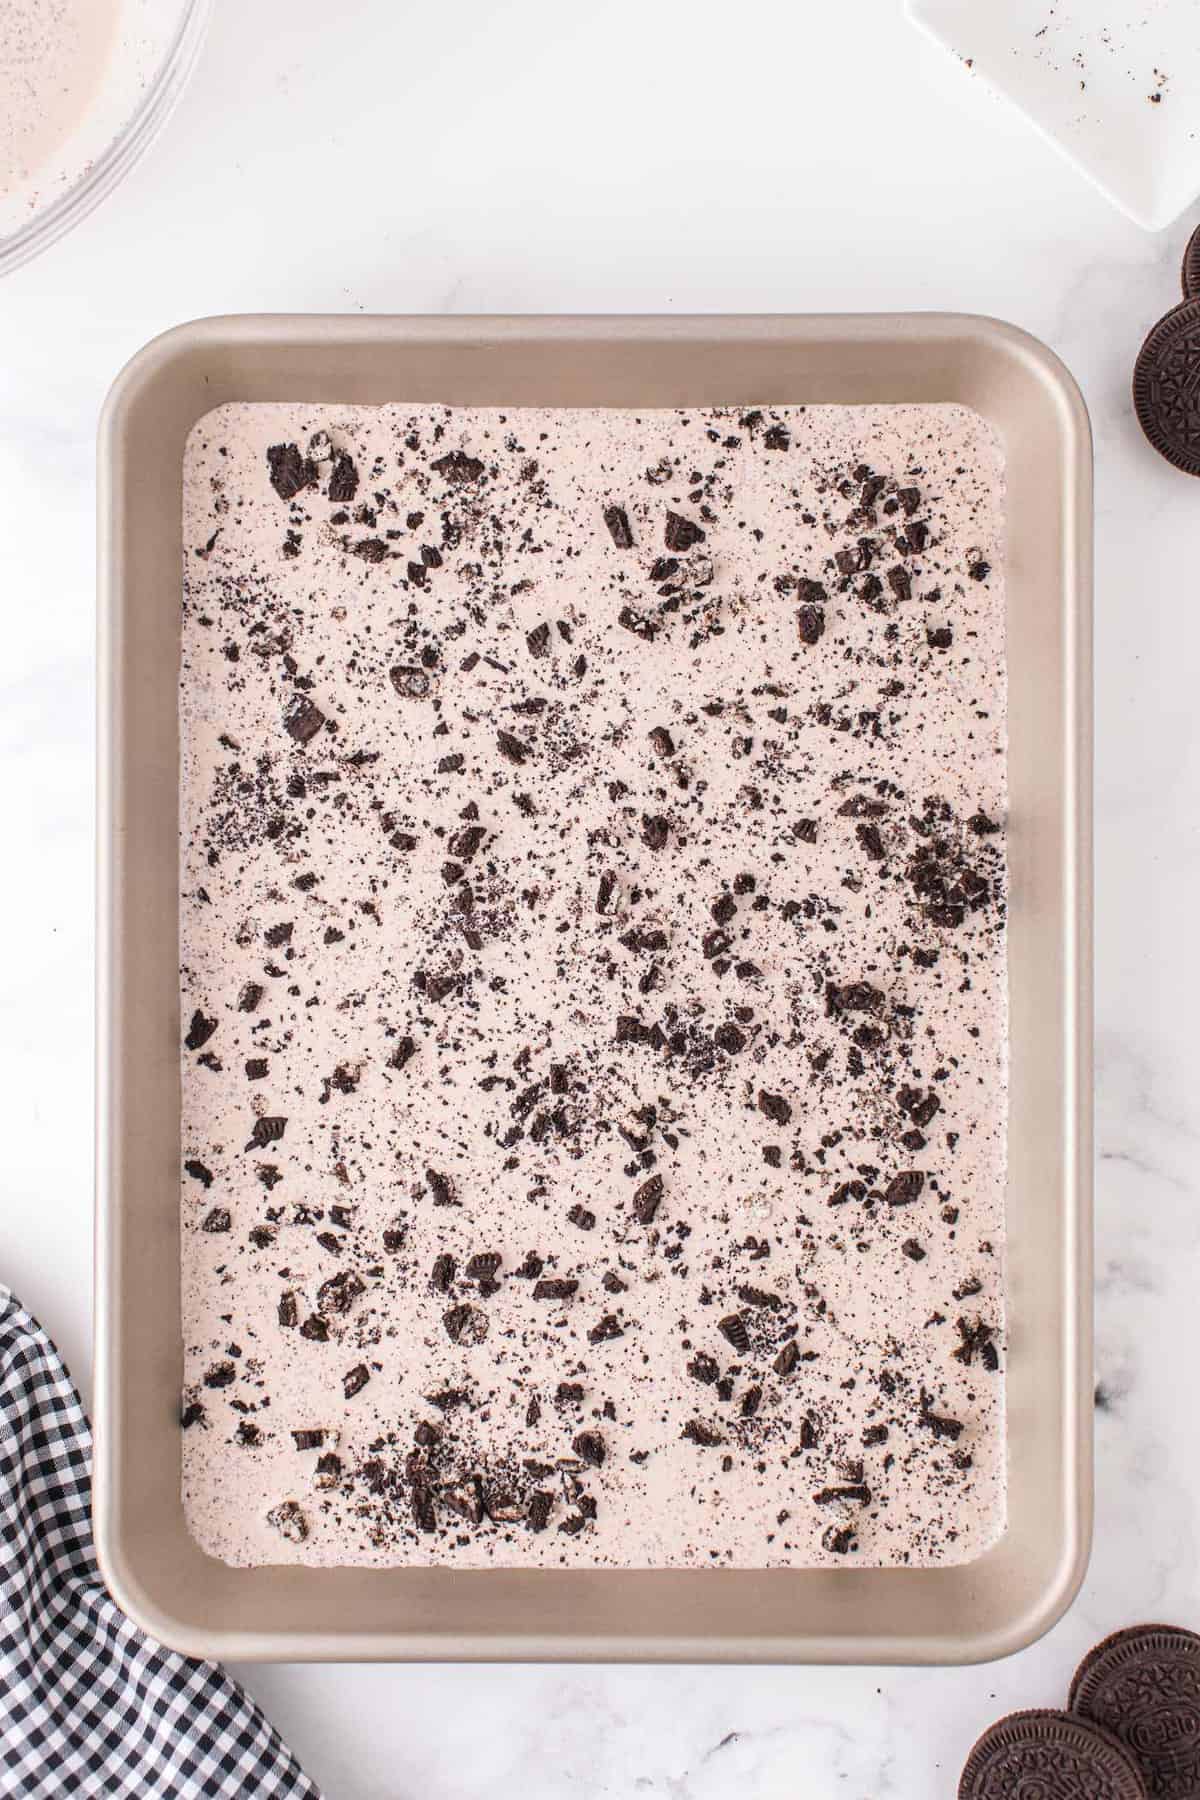 crushed oreo sprinkled on the mixture in a sheet pan